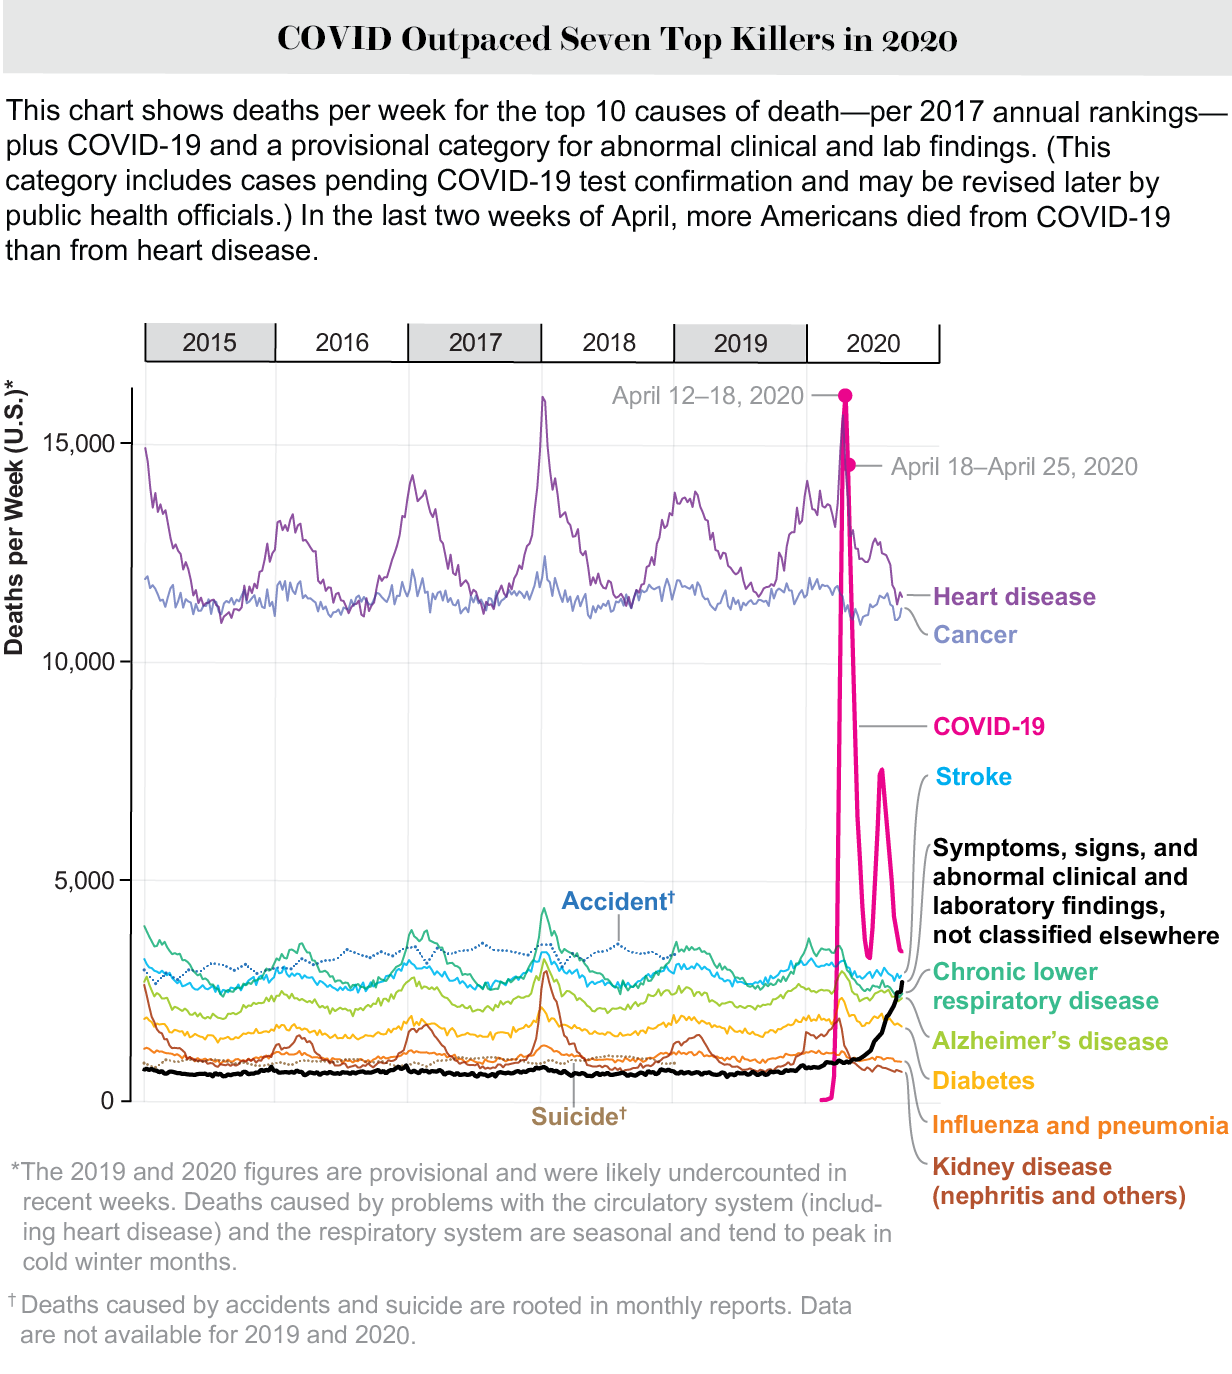 Deaths per week broken down by cause of death. For two weeks in April, more Americans died from COVID-19 than any other single cause